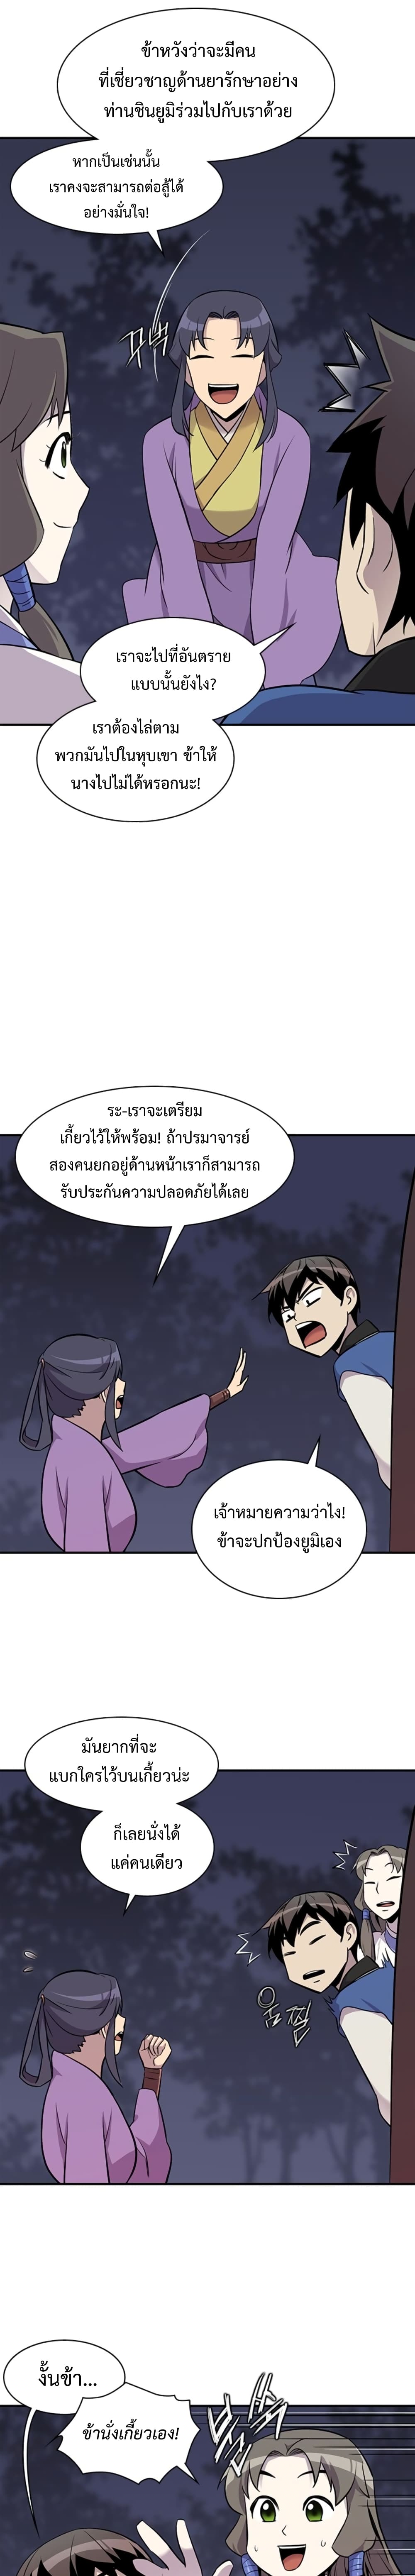 The Strongest Ever à¸à¸­à¸à¸à¸µà¹ 27 (16)